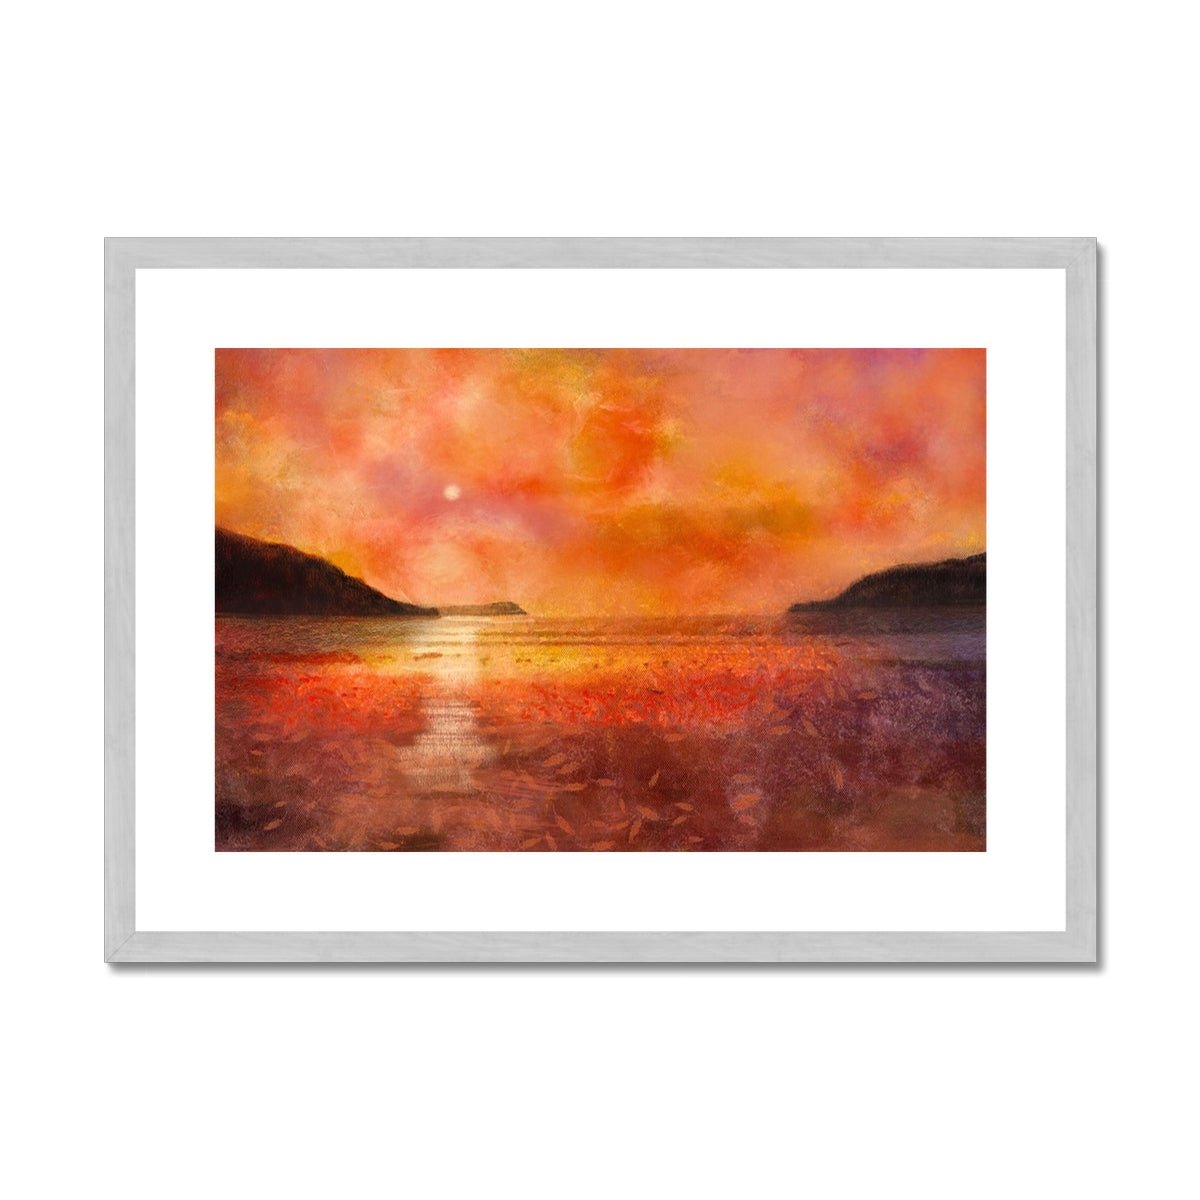 Calgary Beach Sunset Mull Painting | Antique Framed & Mounted Prints From Scotland-Antique Framed & Mounted Prints-Hebridean Islands Art Gallery-A2 Landscape-Silver Frame-Paintings, Prints, Homeware, Art Gifts From Scotland By Scottish Artist Kevin Hunter